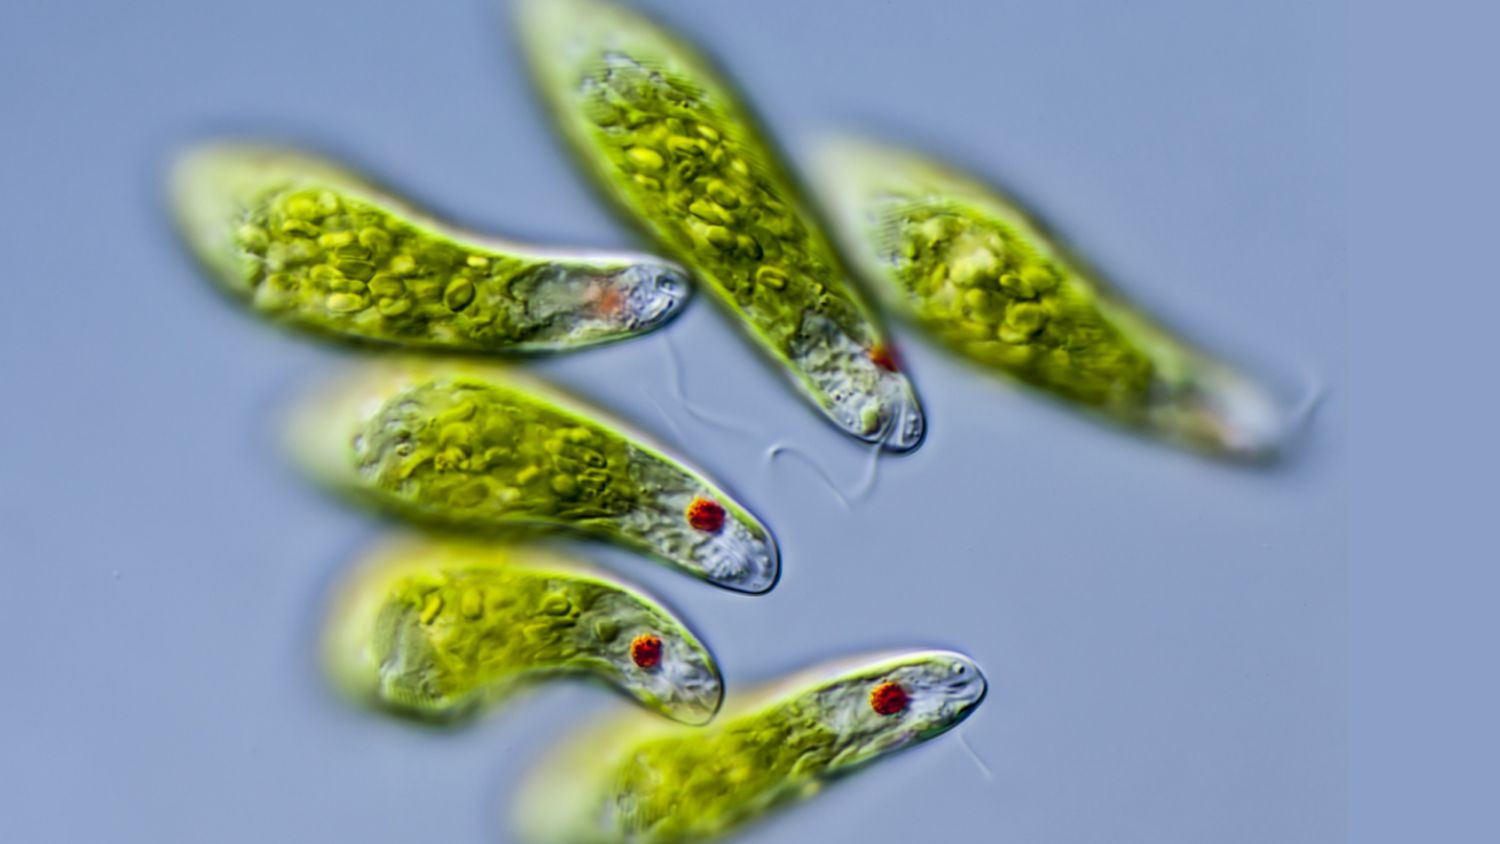 <p>algae (green algae) nutrition: mixotrophic organism -&gt; photosynthesizes using chloroplasts but switches to heterotrophy when sunlight isn&apos;t available locomotion: flaglleum</p>